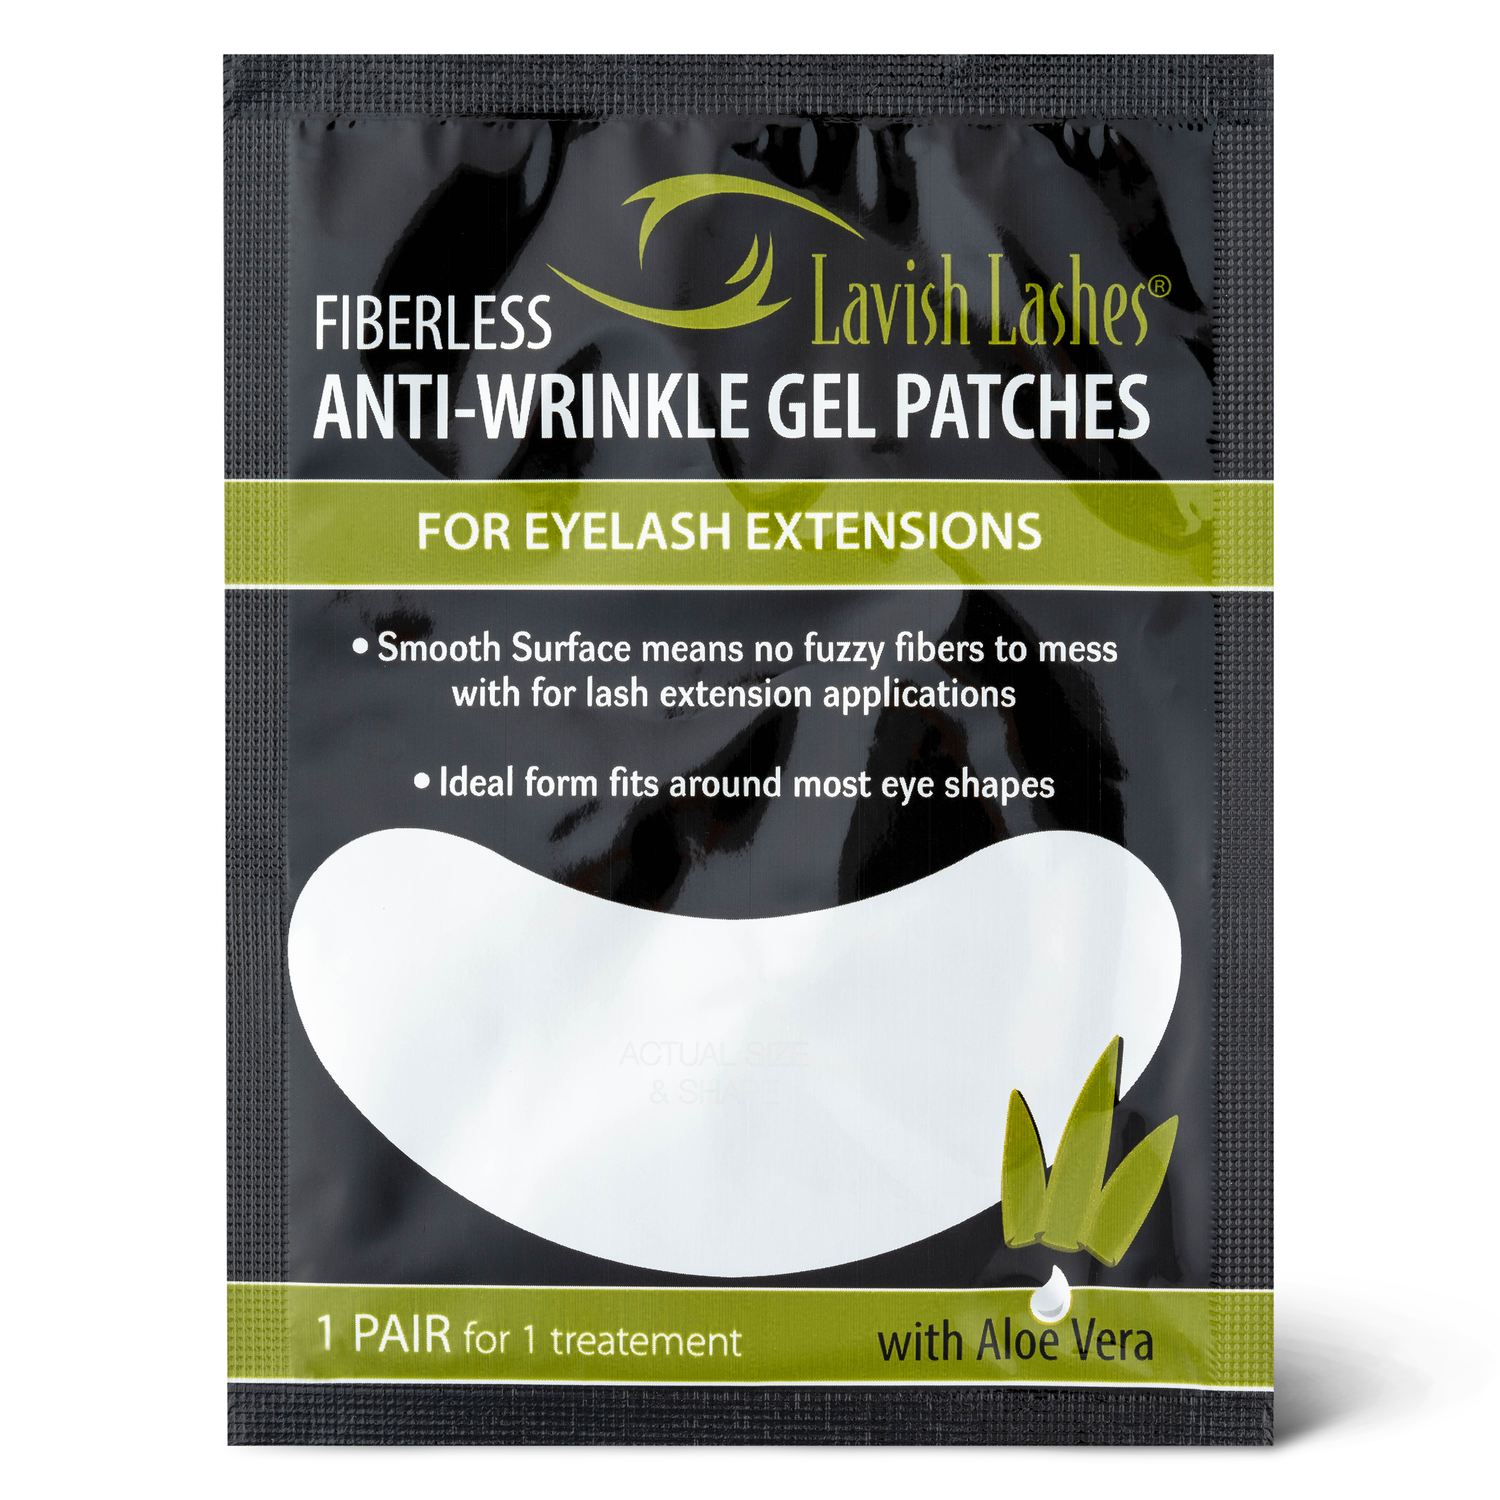 Anti-Wrinkle Gel Patches